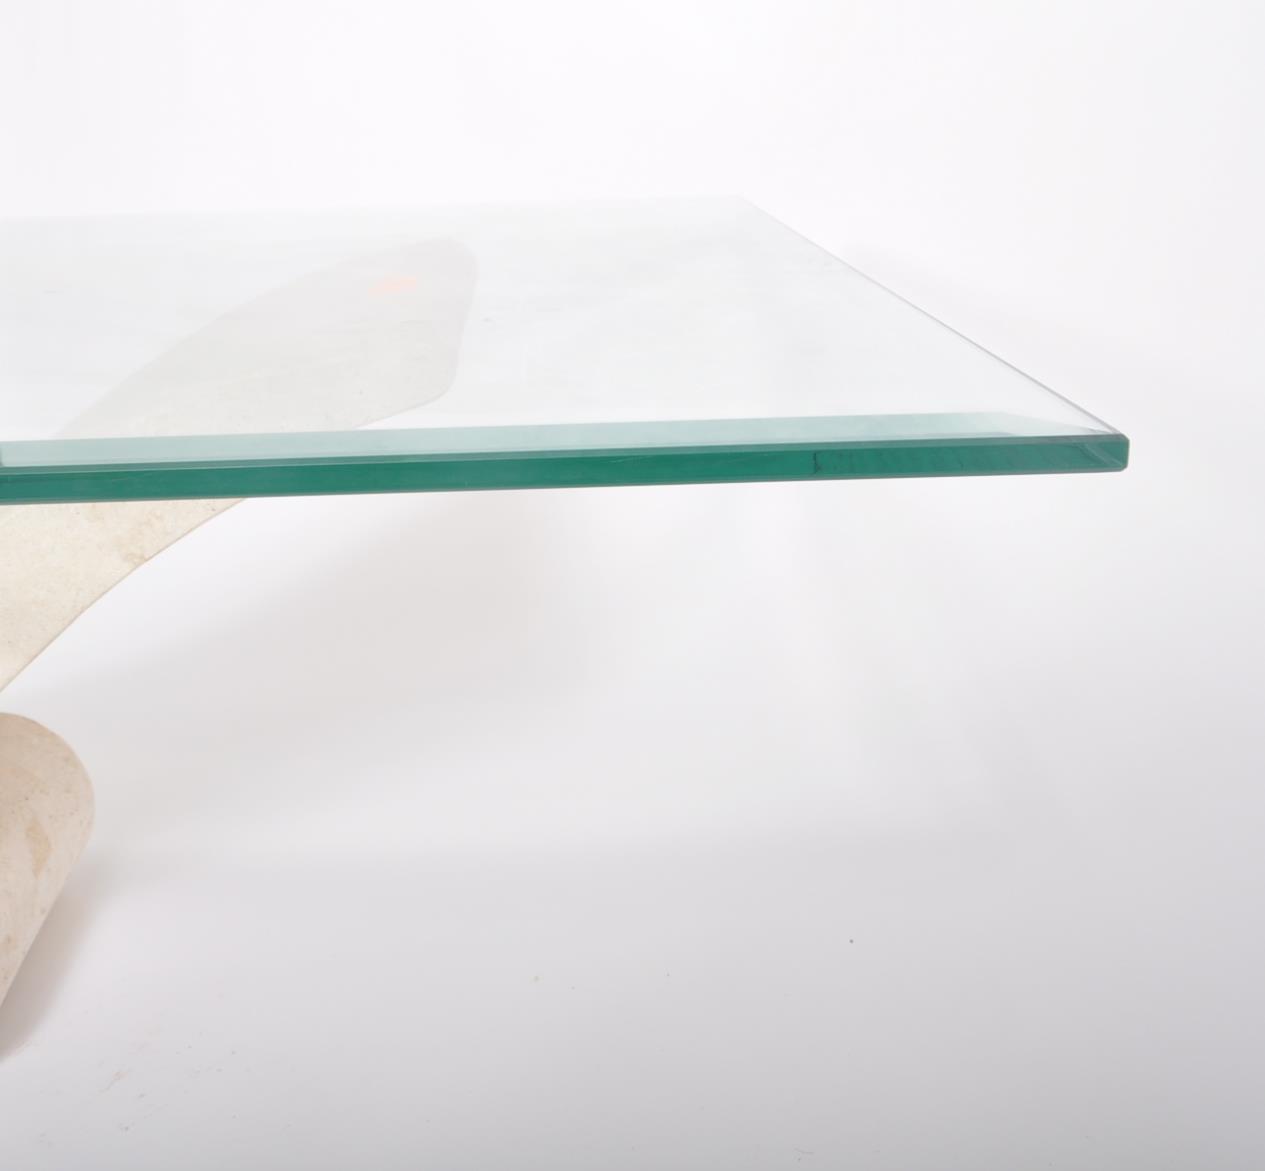 CONTEMPORARY ITALIAN DESIGN COMPOSITE & GLASS LOW TABLE - Image 6 of 7